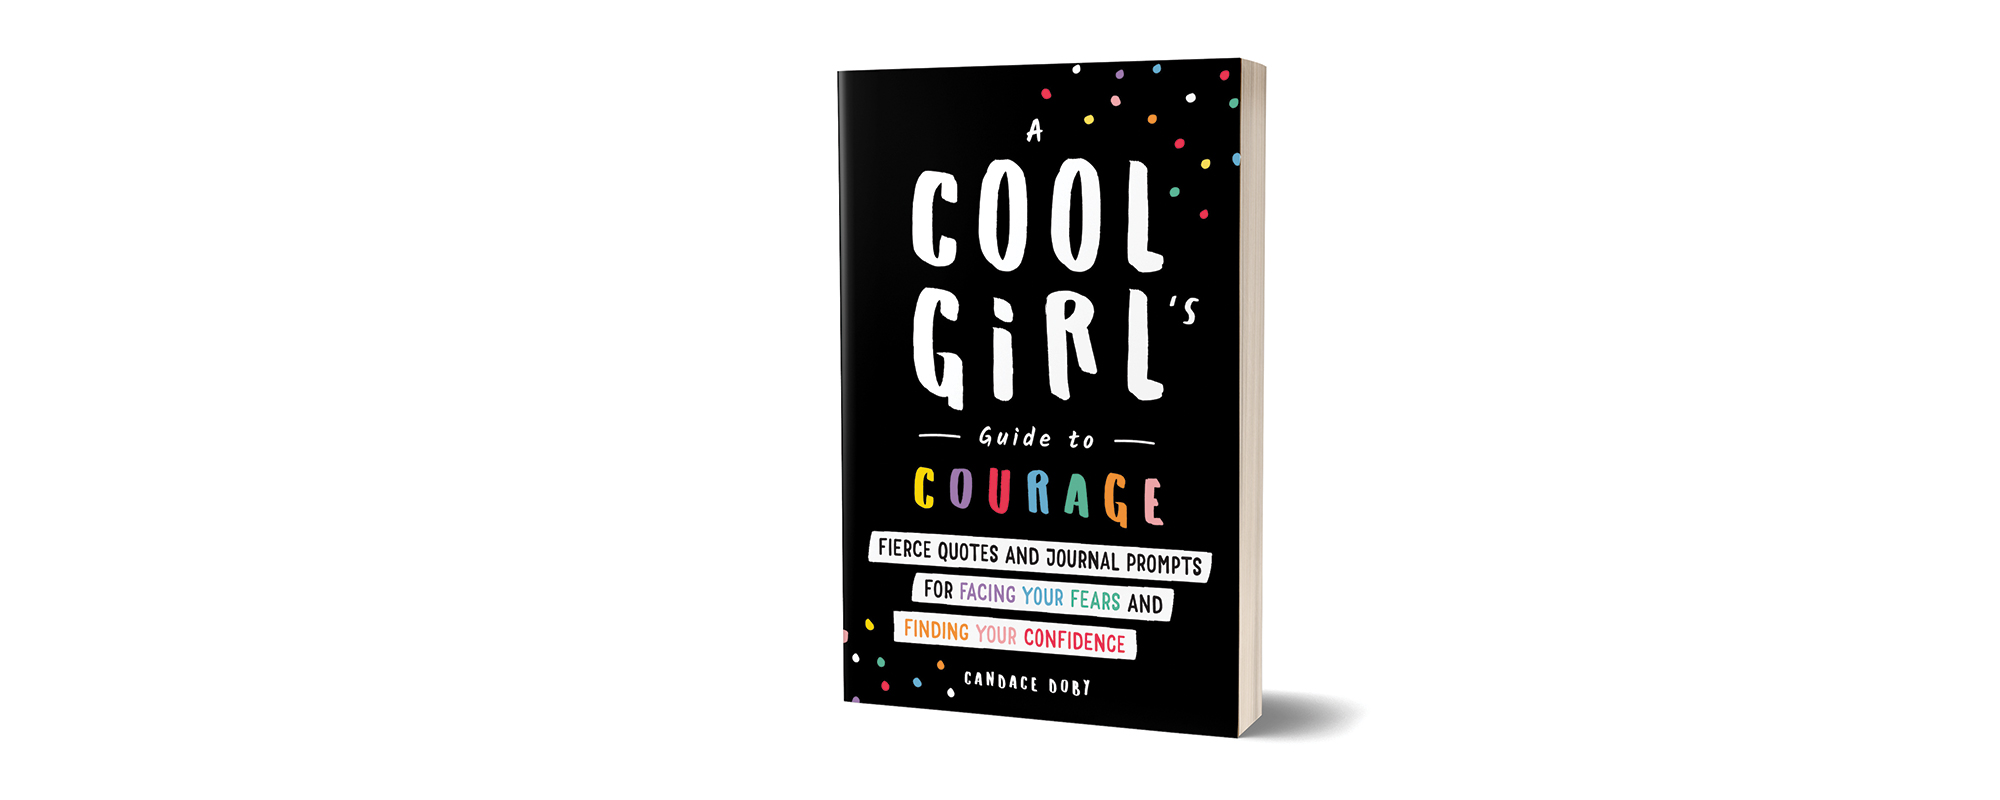 A Cool Girl's Guide To Courage